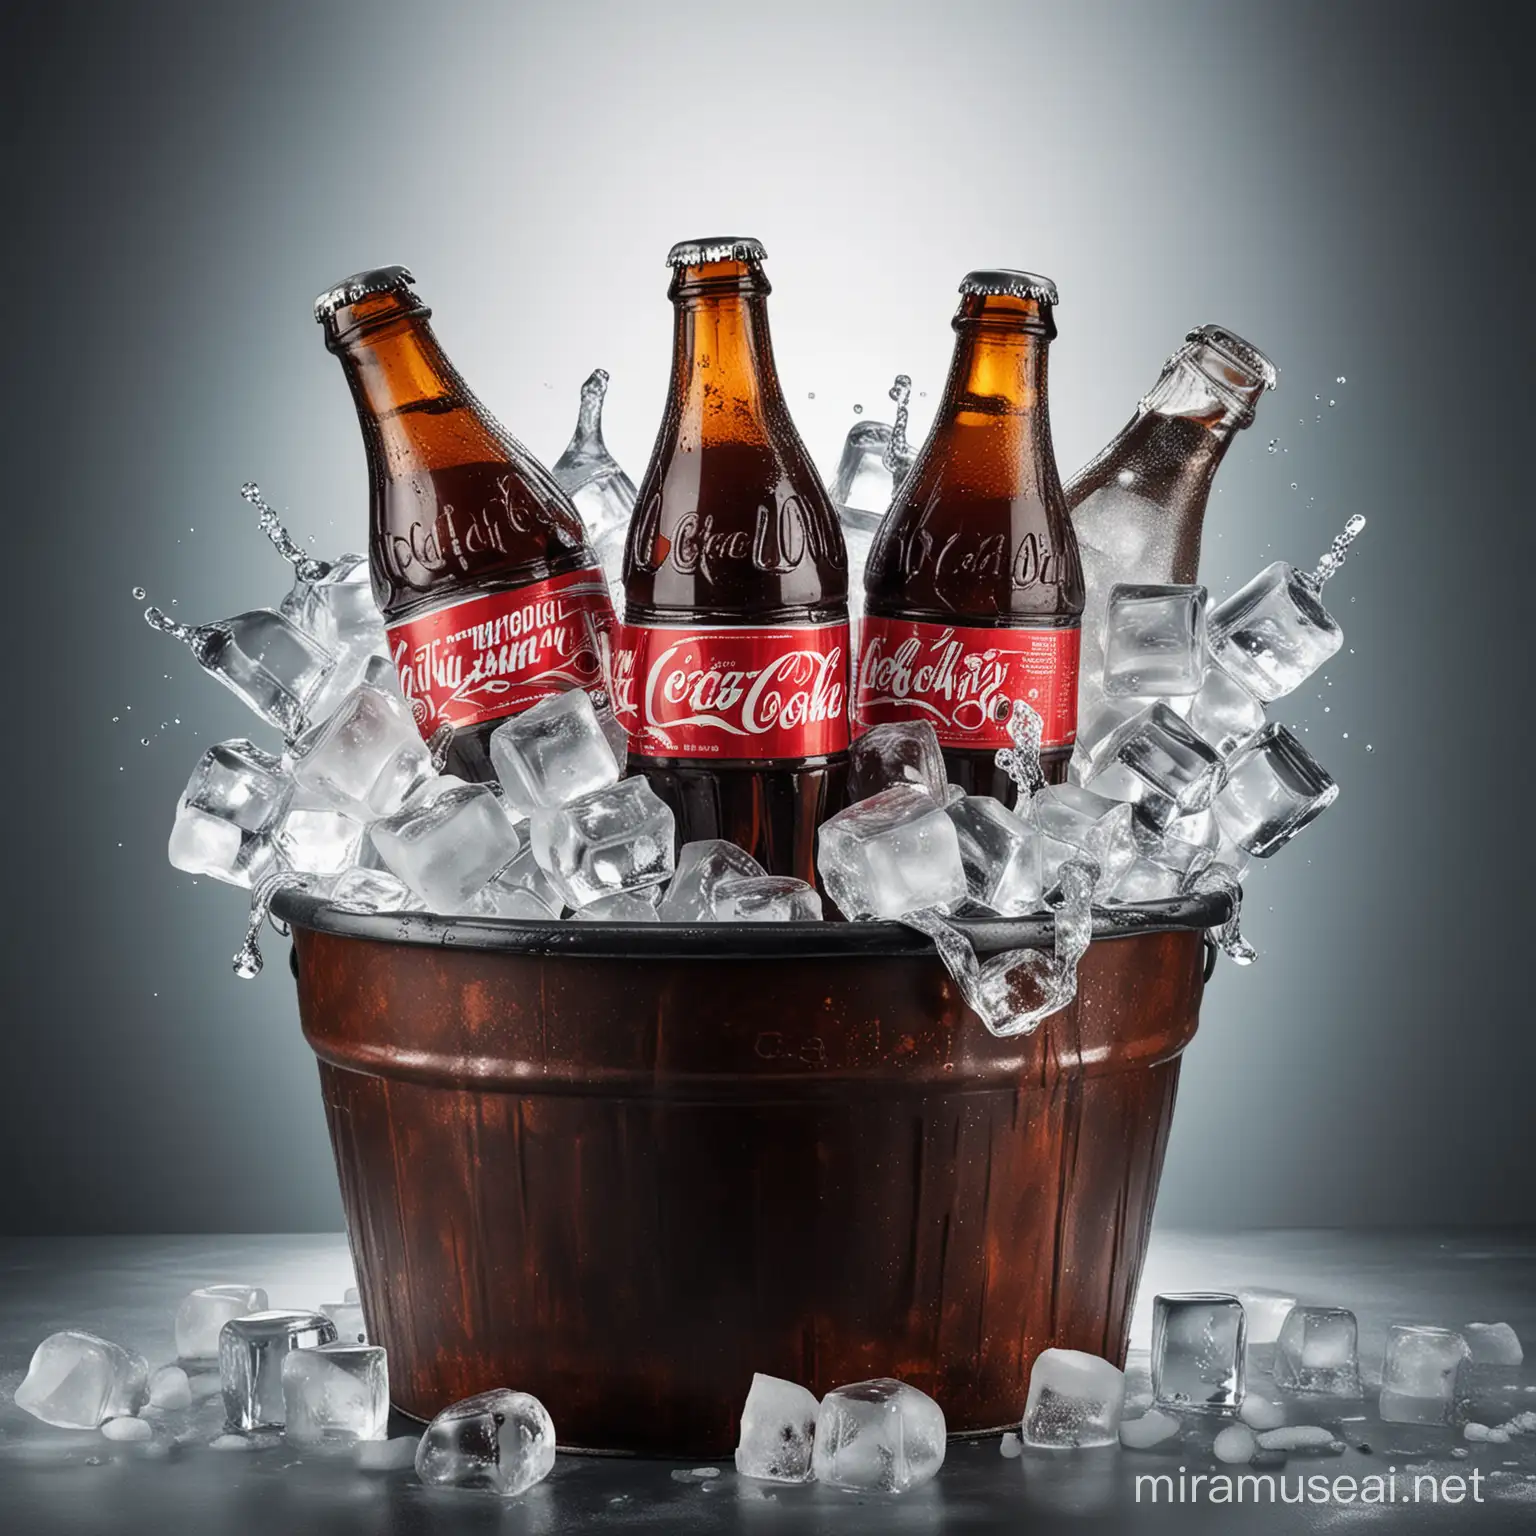 Create an image of one big cold bottle of coke inside a bucket of ice cubes